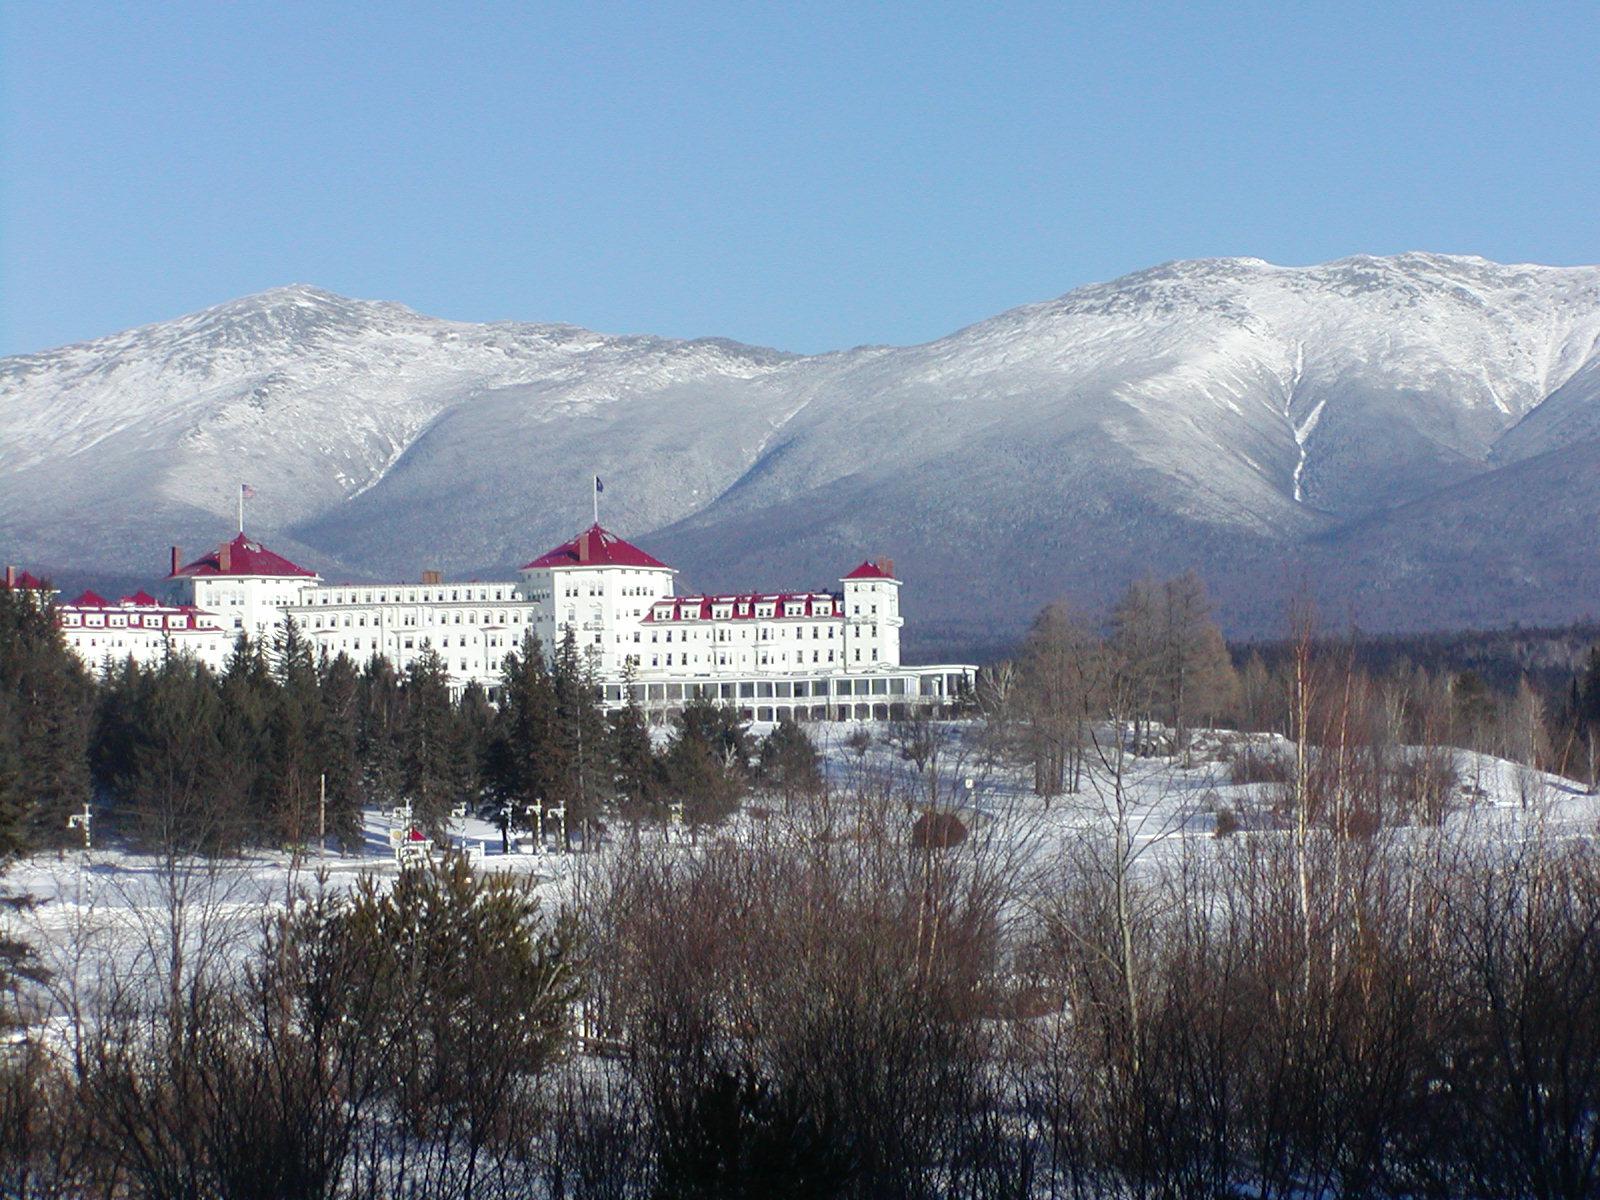 Mt Washington from Bretton Woods (user submitted)